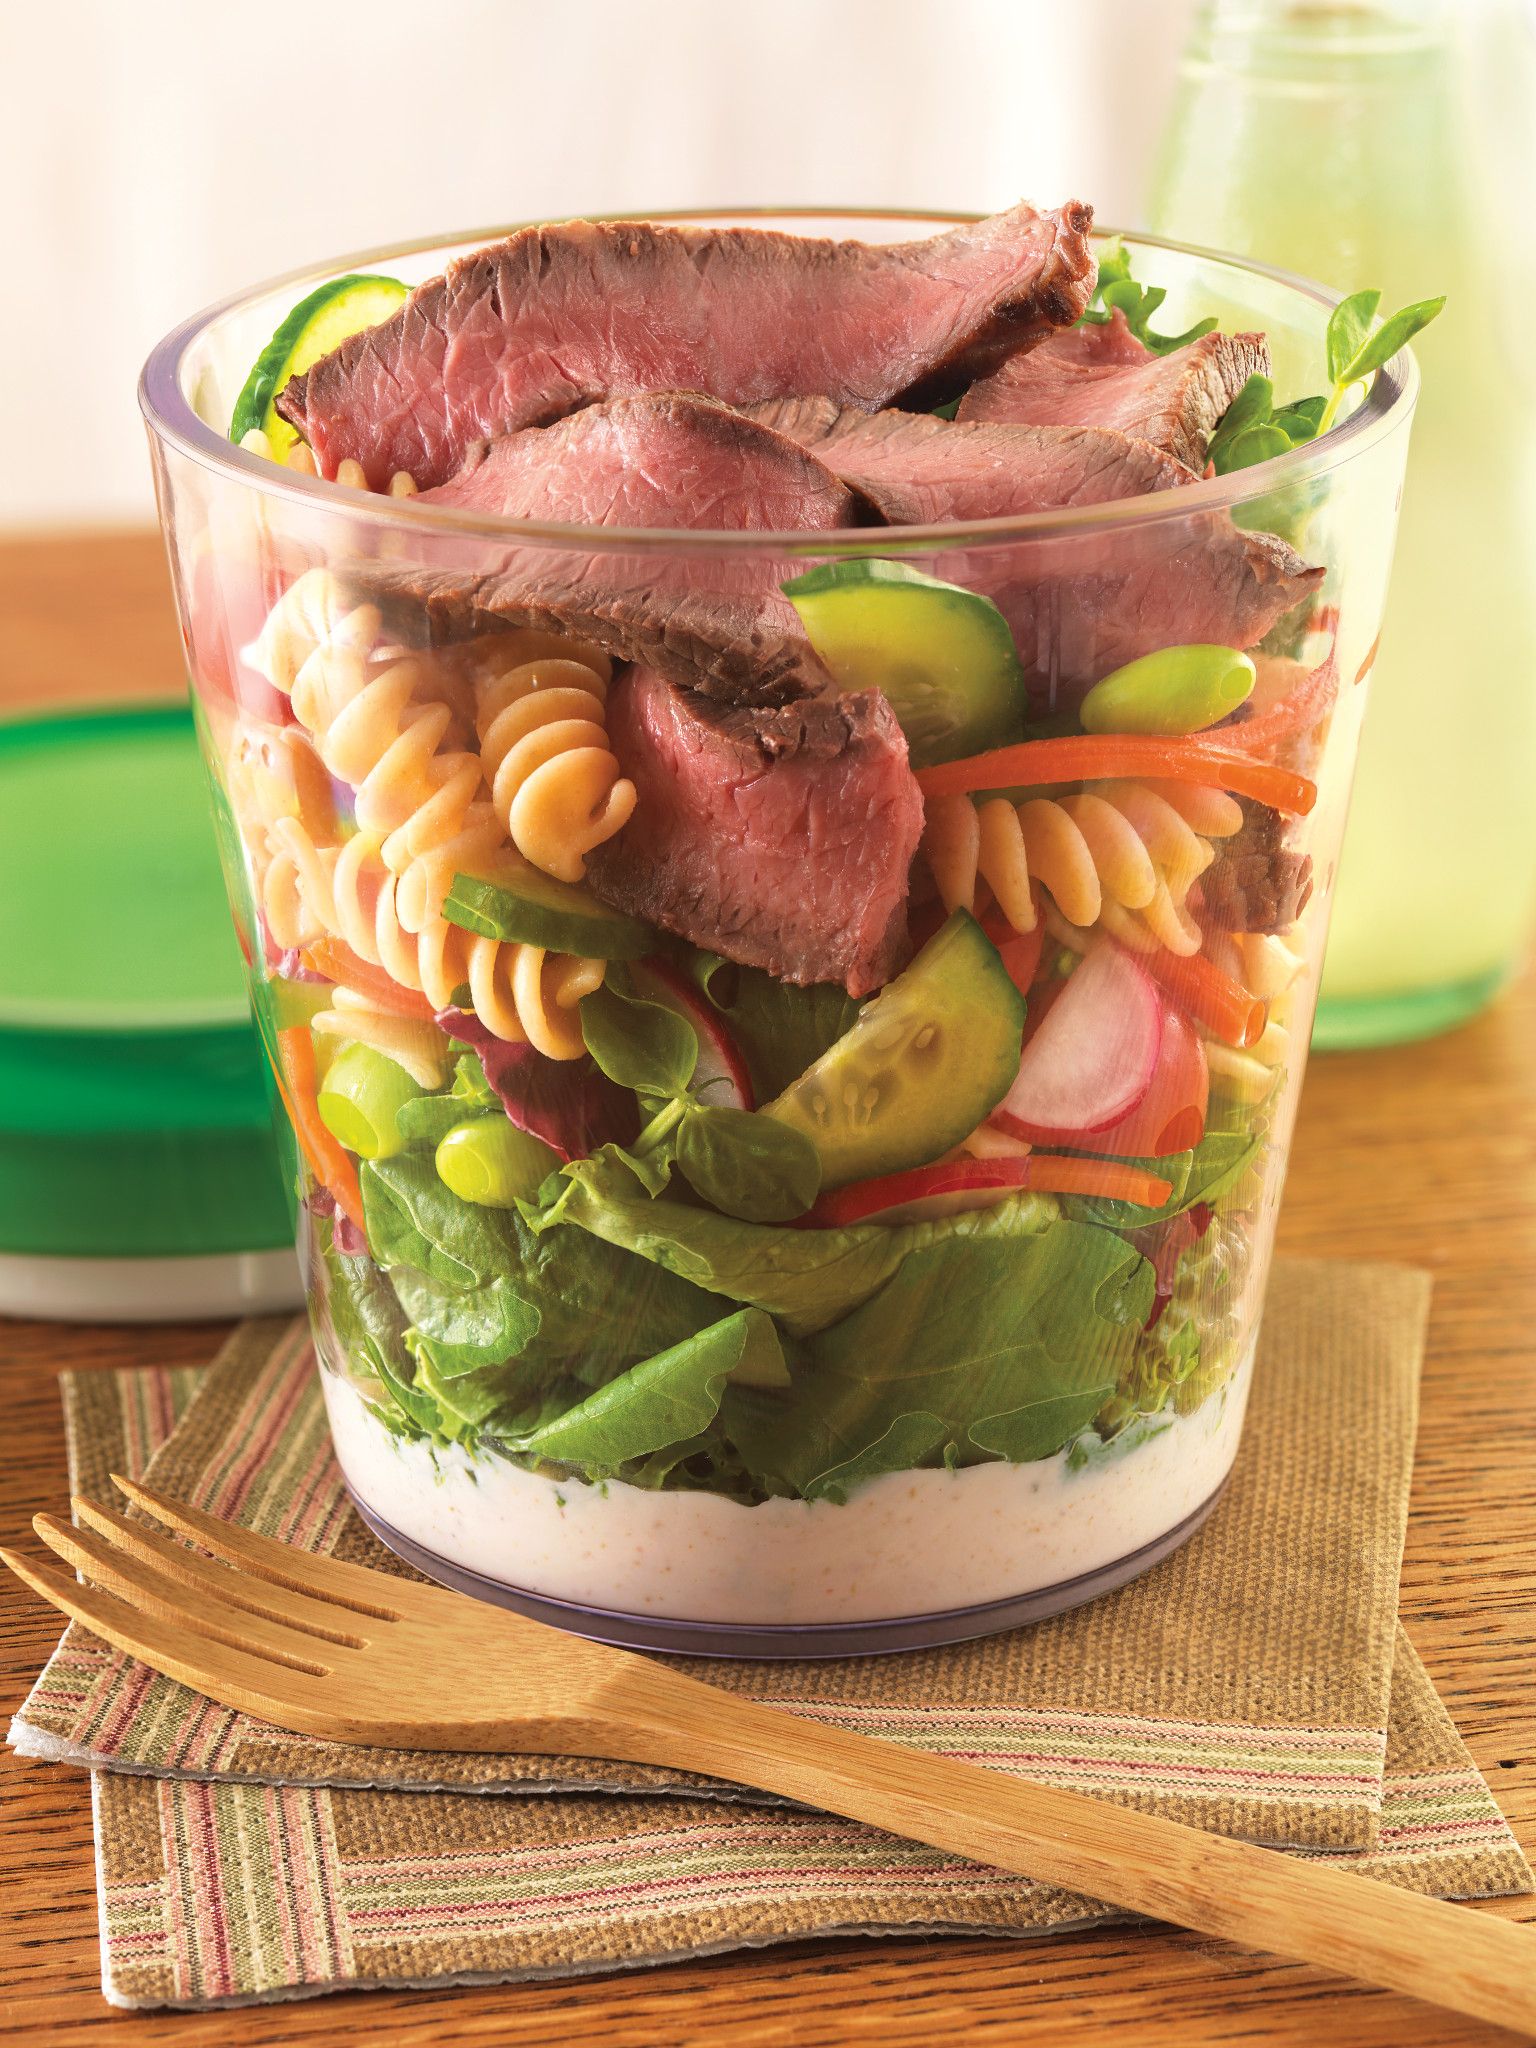 Layered Beef Salad On-The-Go | Beef Loving Texans